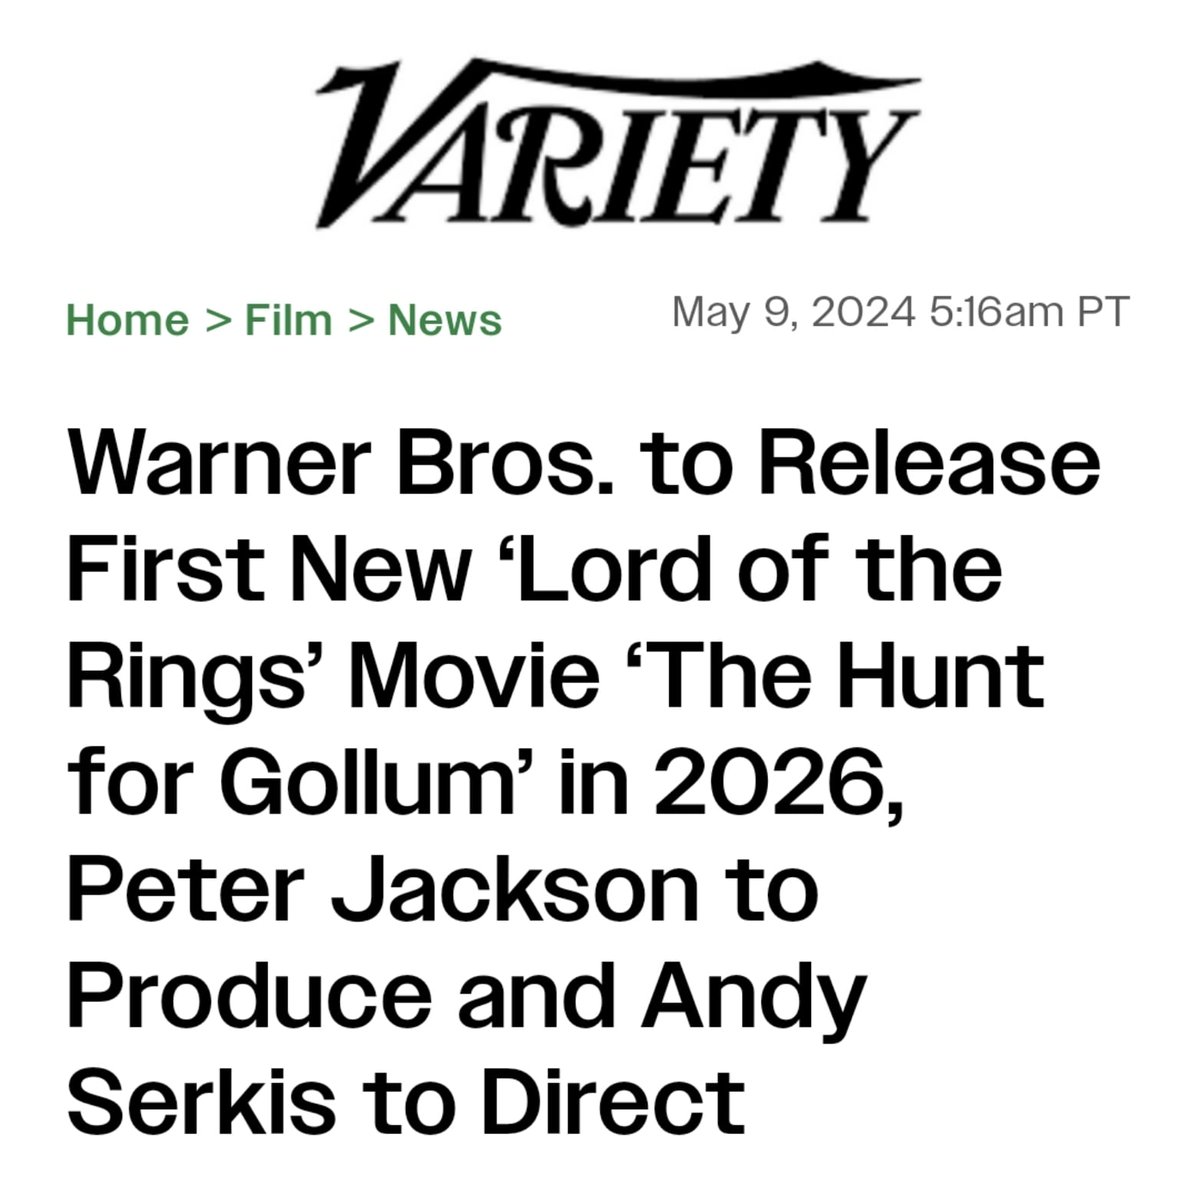 I can't help but think that Peter Jackson is turning into the Peter Rogers of Tolkein's movie world. One brilliant, era-defining trilogy followed by another bloated triumverate & TV show is now coming back for more preciouses?! #TheLordoftheRings #PeterJackson #Gollum